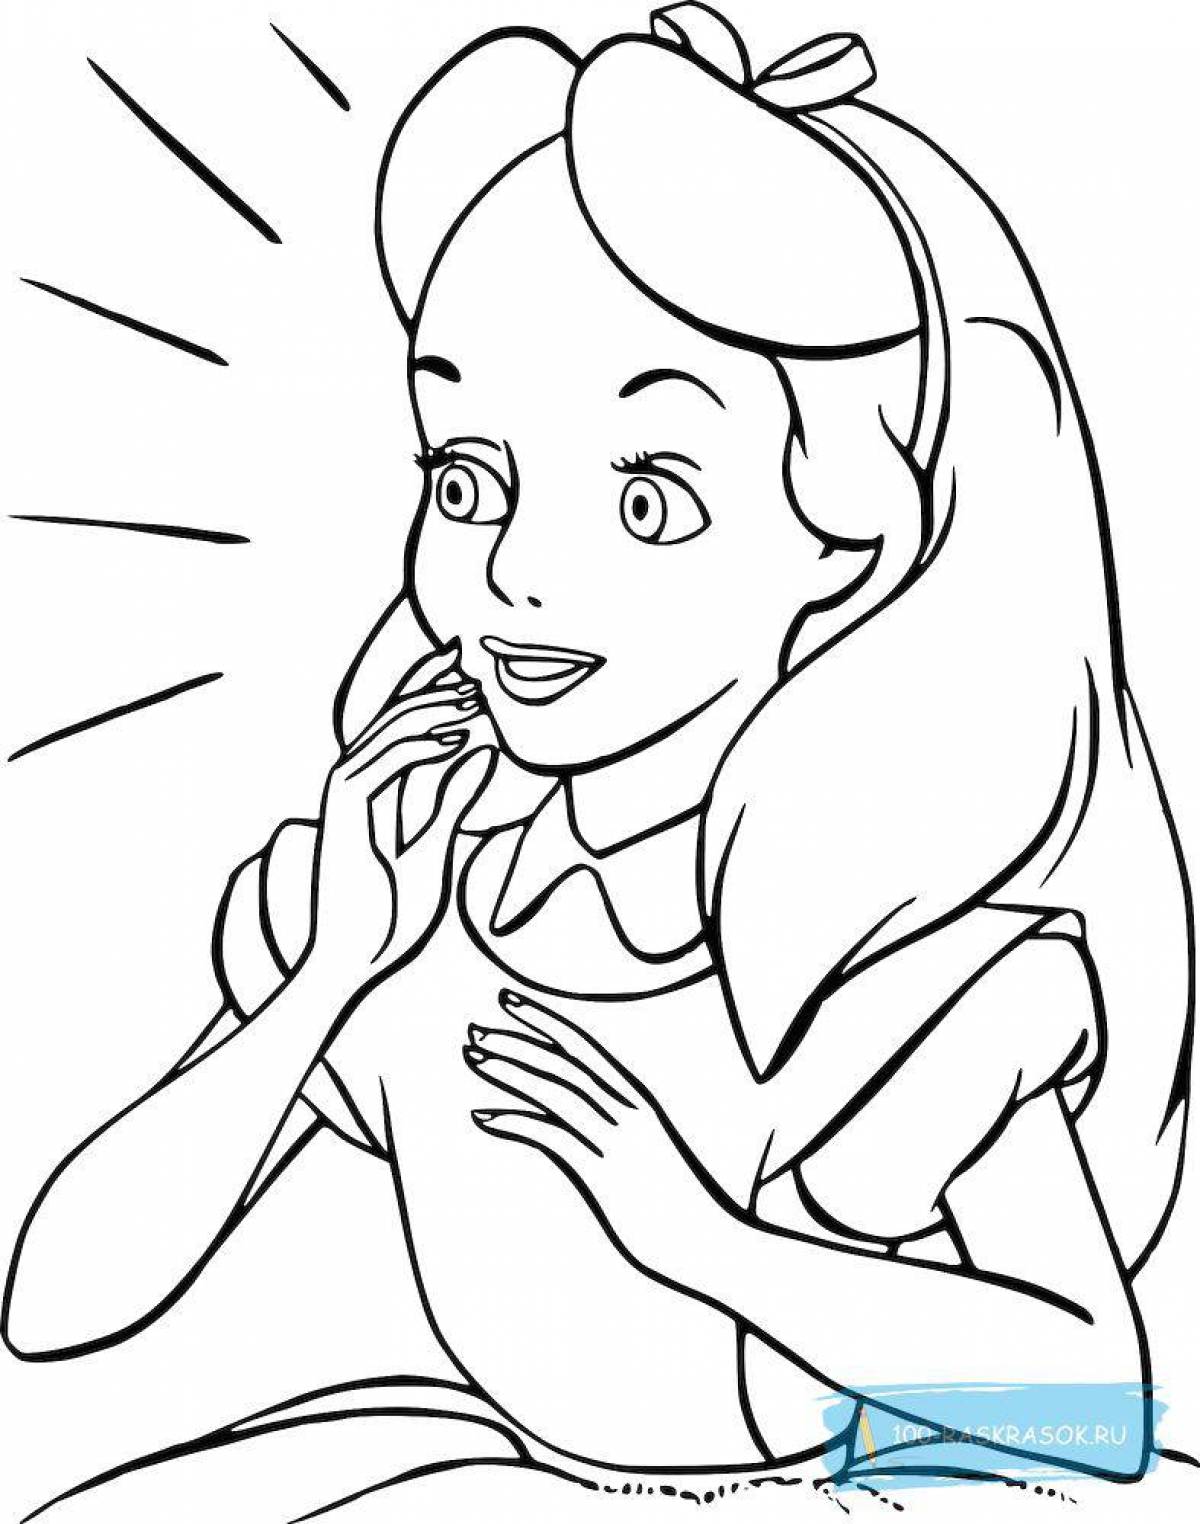 Coloring colorful-delight coloring pages